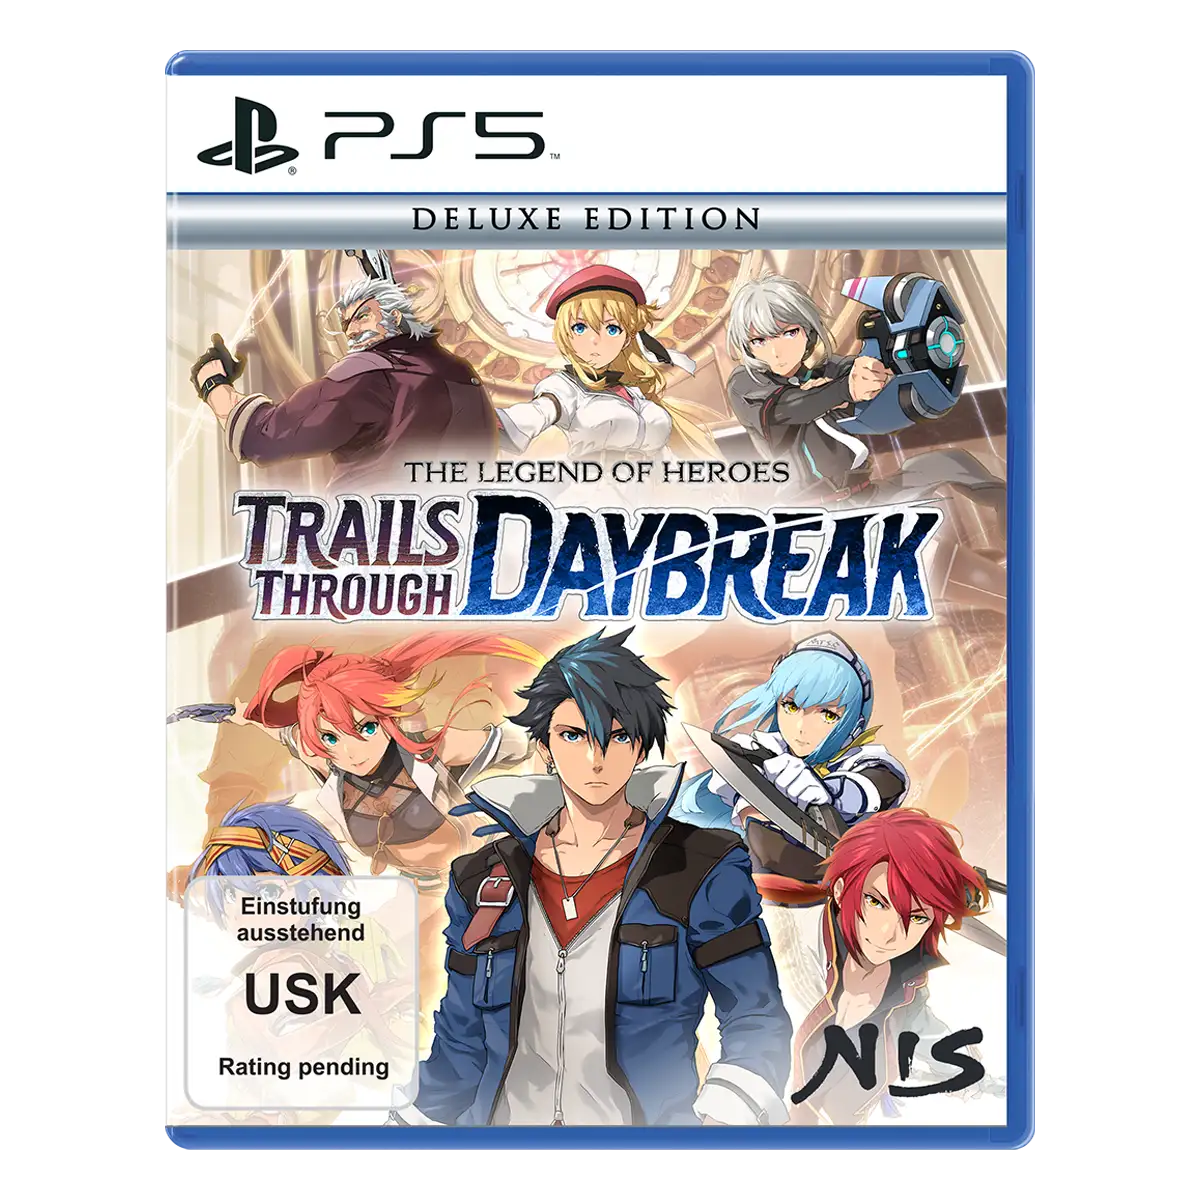 The Legend of Heroes: Trails through Daybreak - Deluxe Edition (PS5) Cover